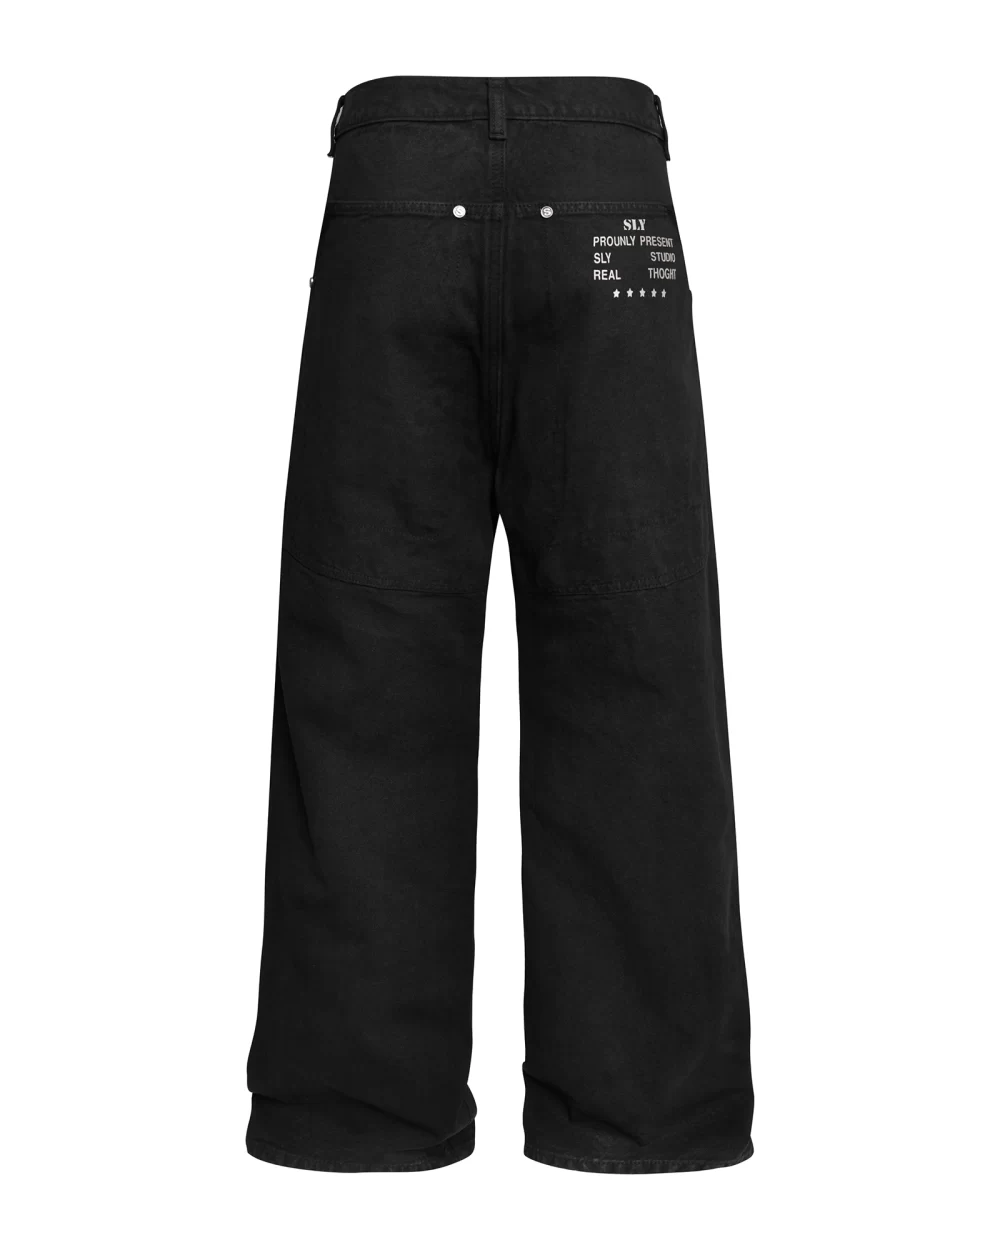 Black Washed Canvas Double Knee Pant 8